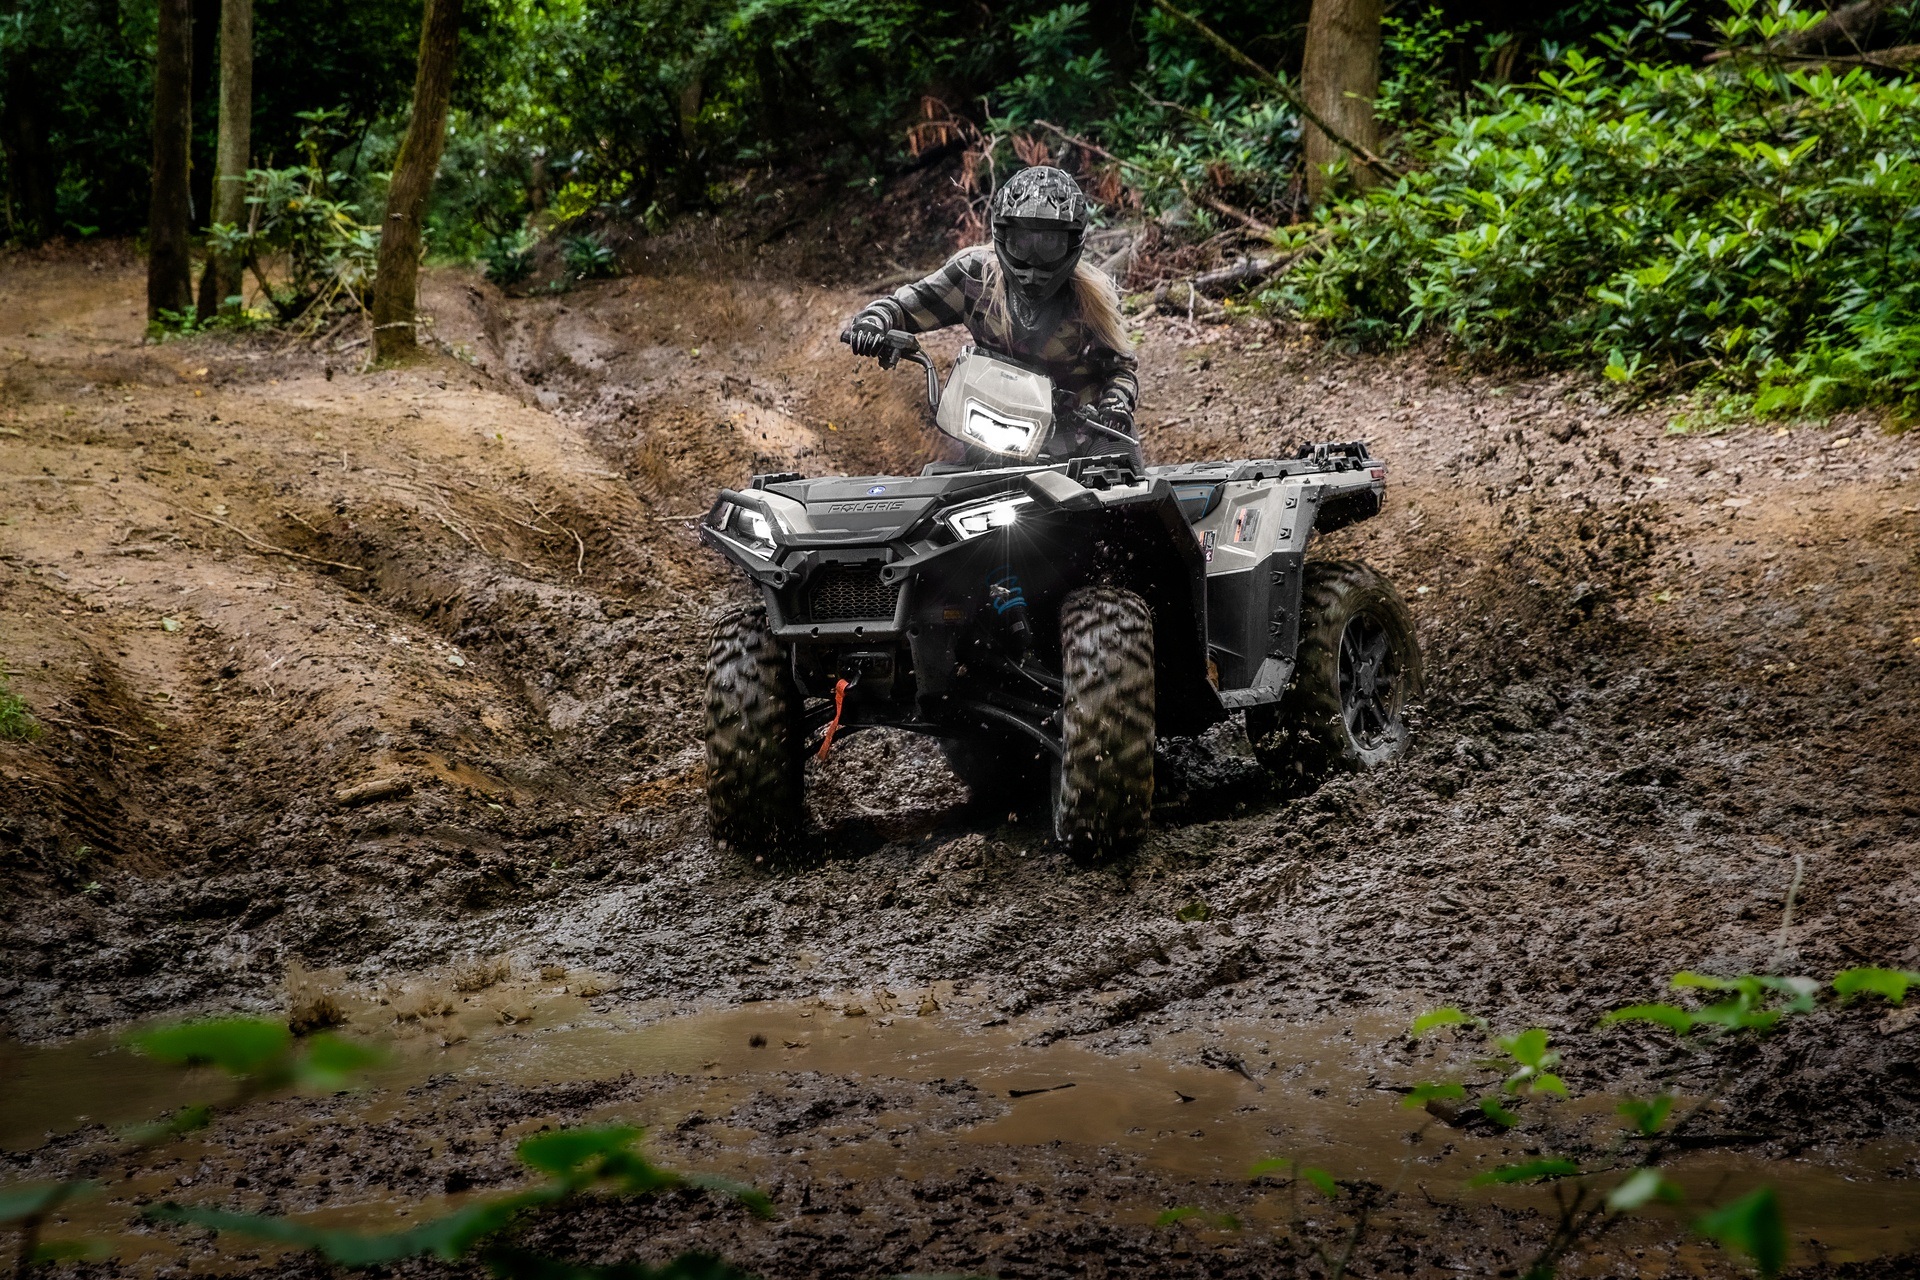 Visit All Trails Powersports in Mechanicsburg, PA.